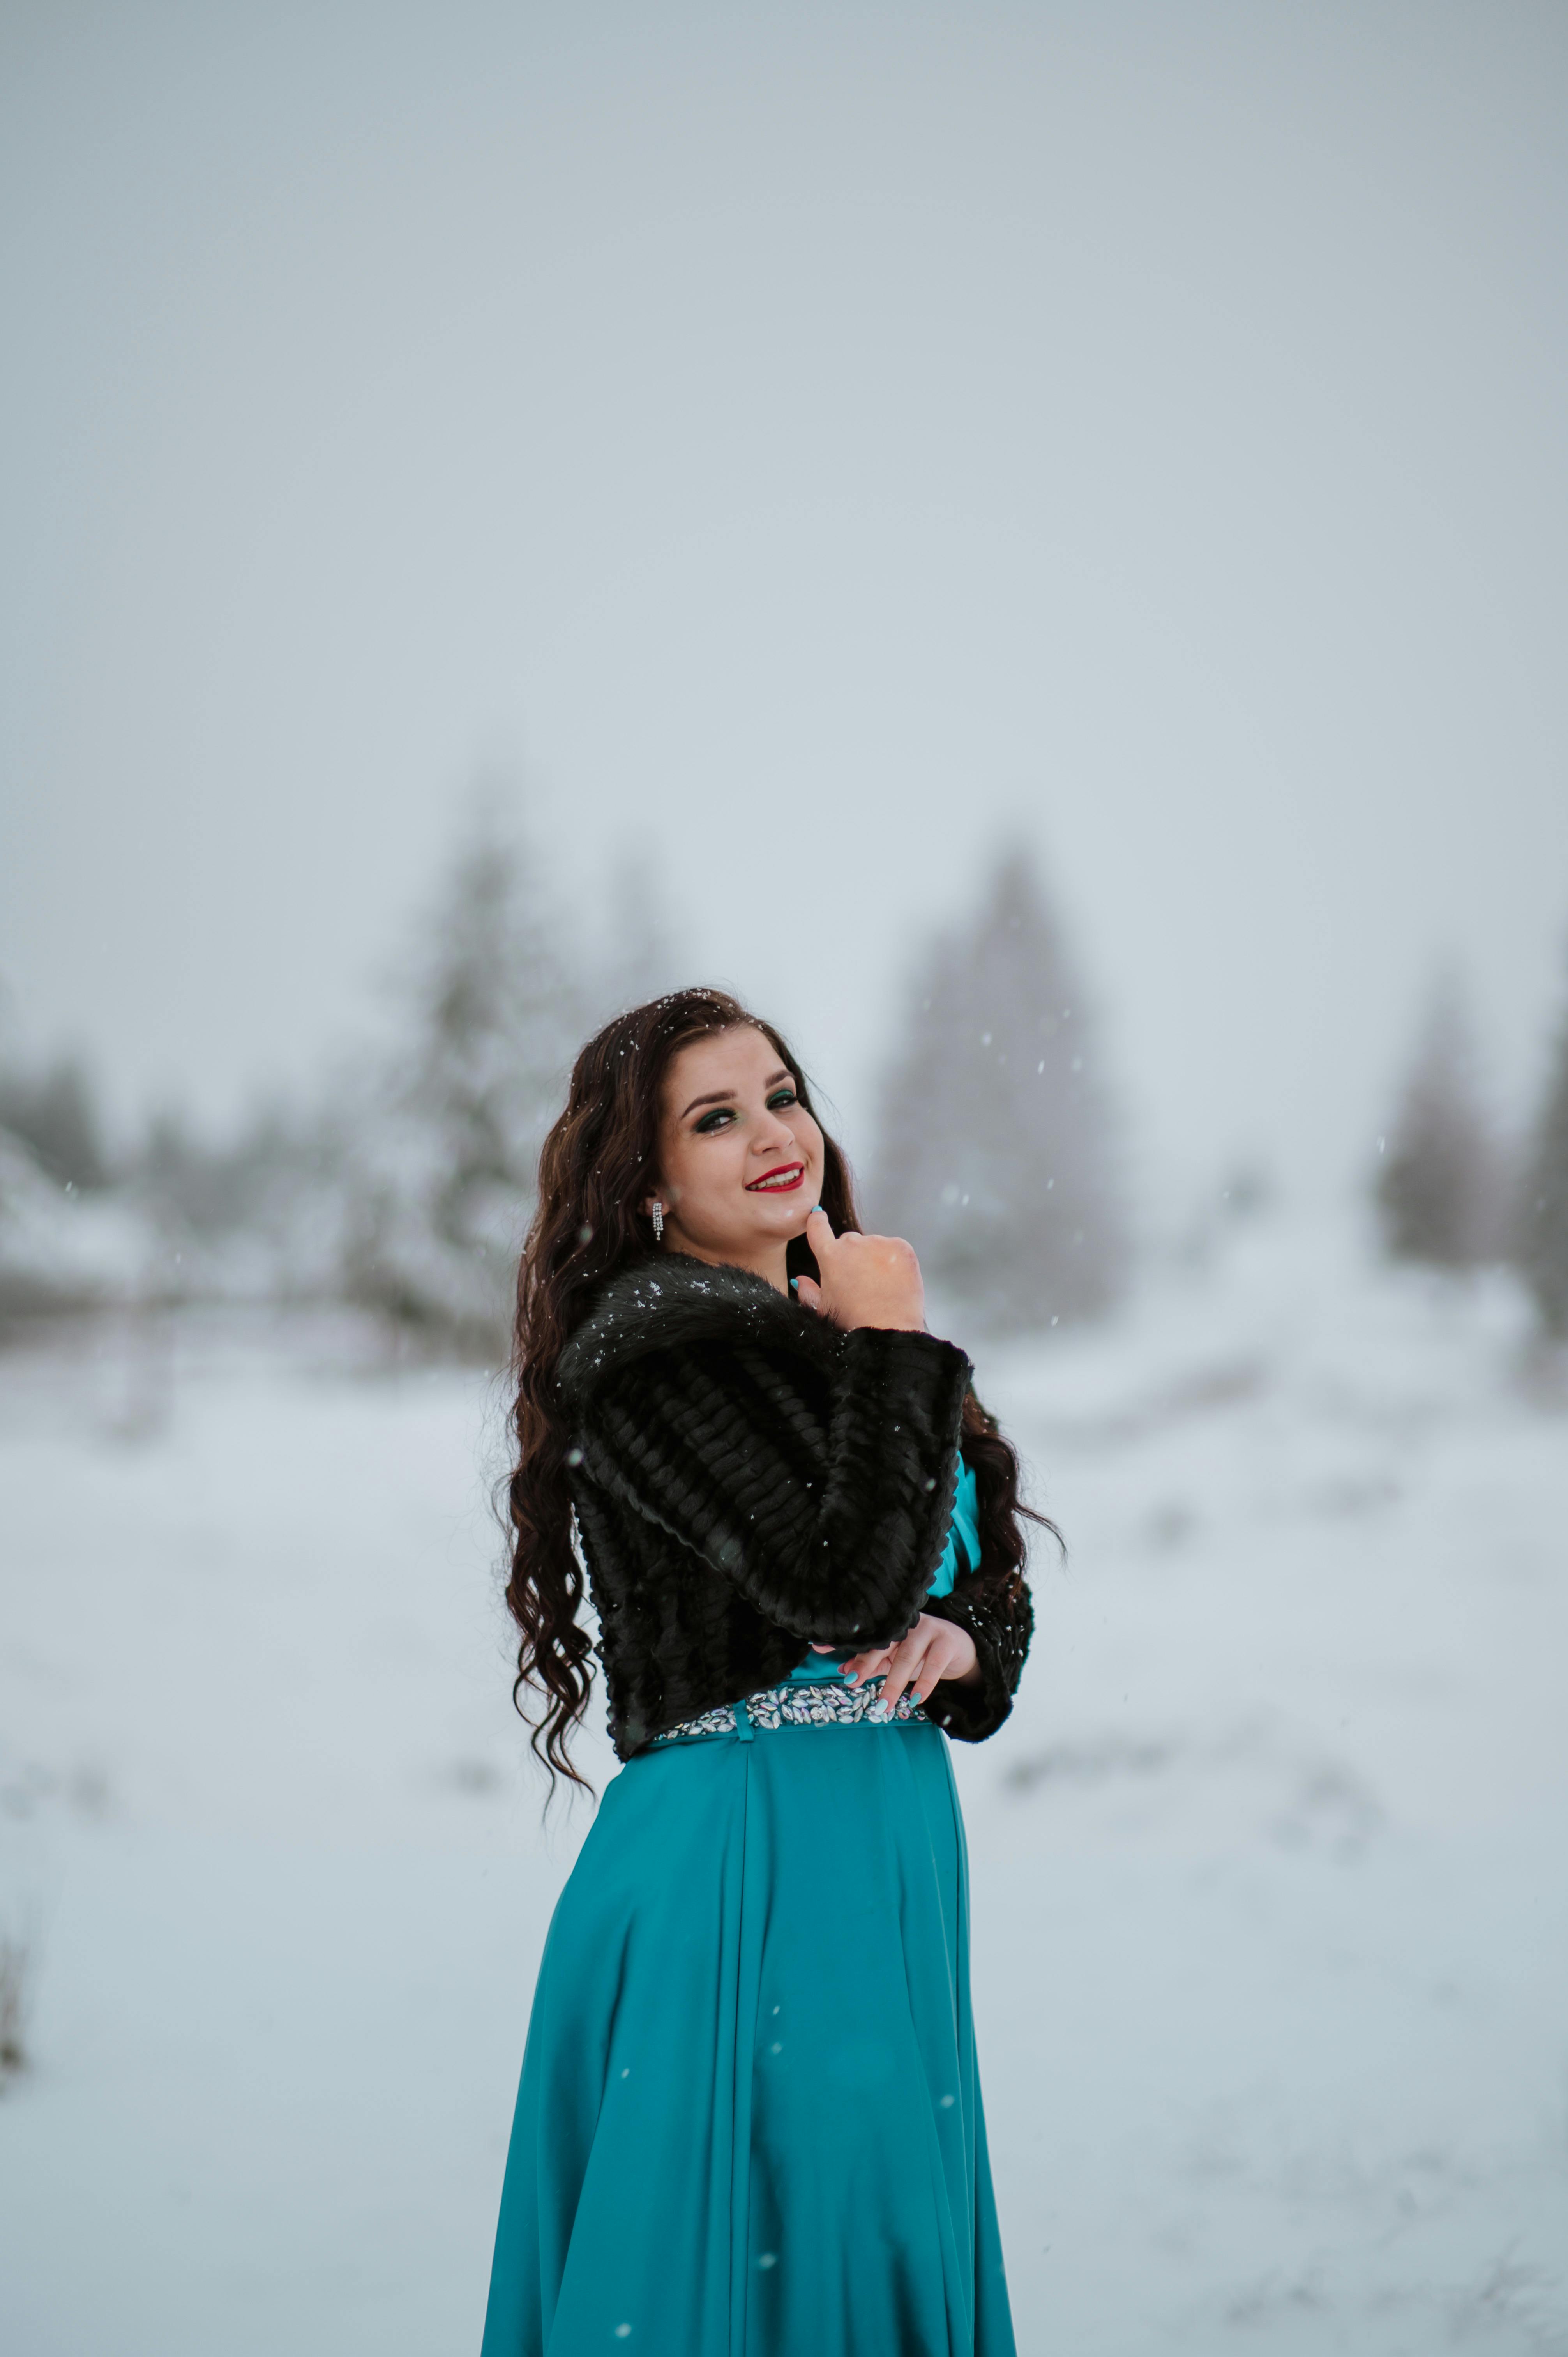 Beautiful Woman Enjoying The Snow In The Park